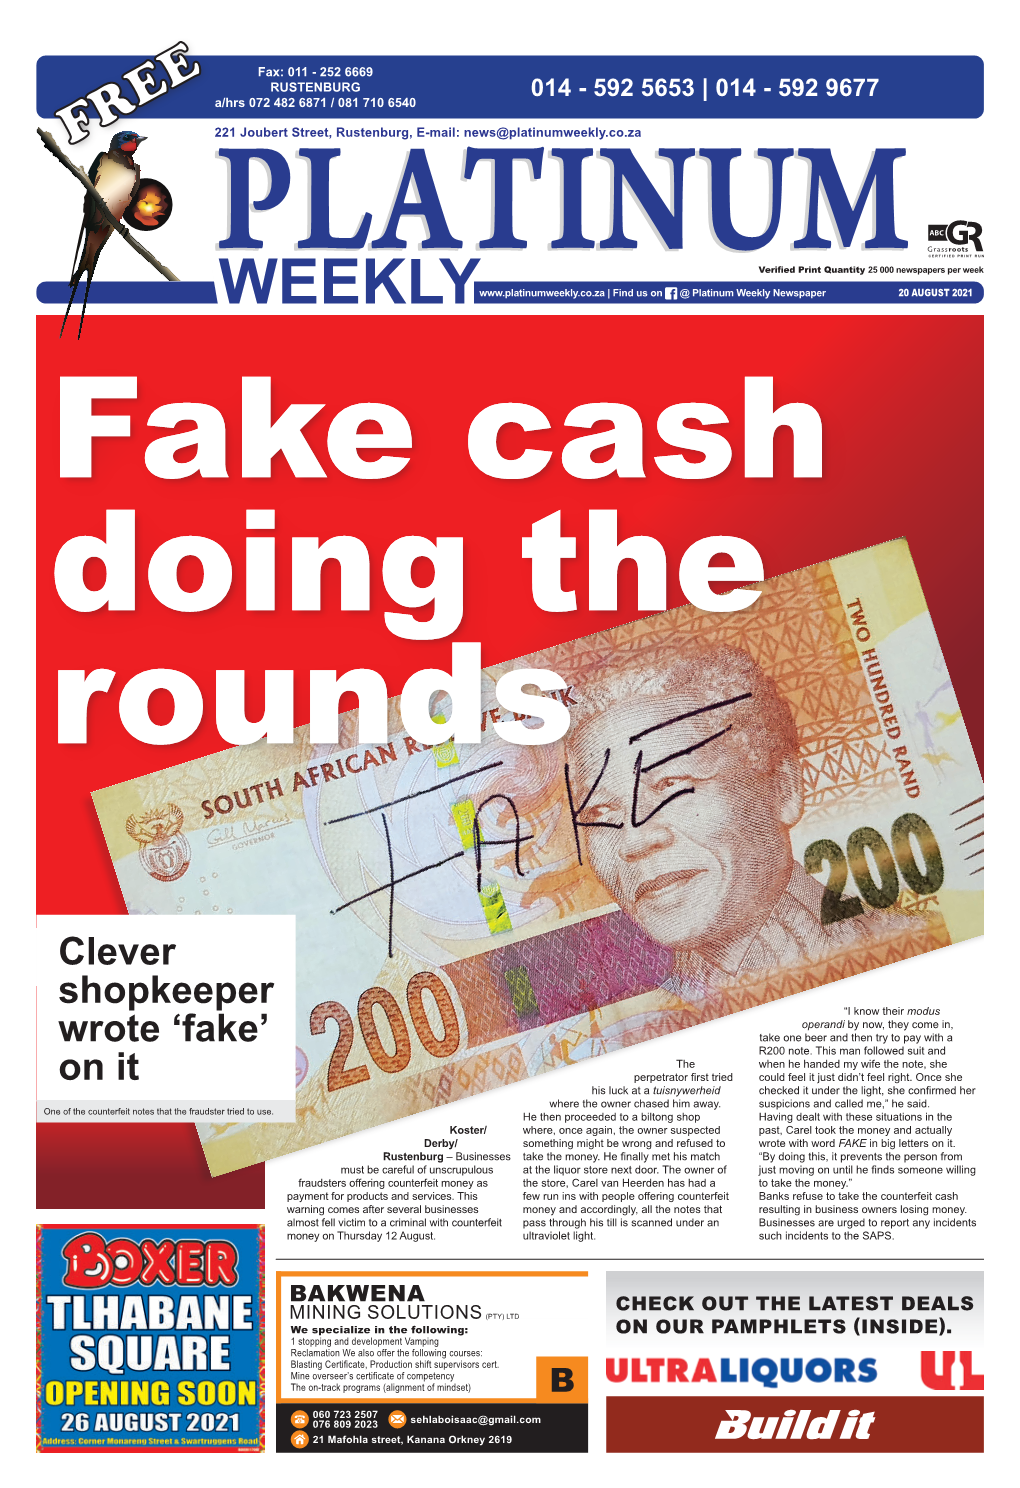 Platinum Weekly Newspaper 20 AUGUST 2021 Fake Cash Doing the Rounds